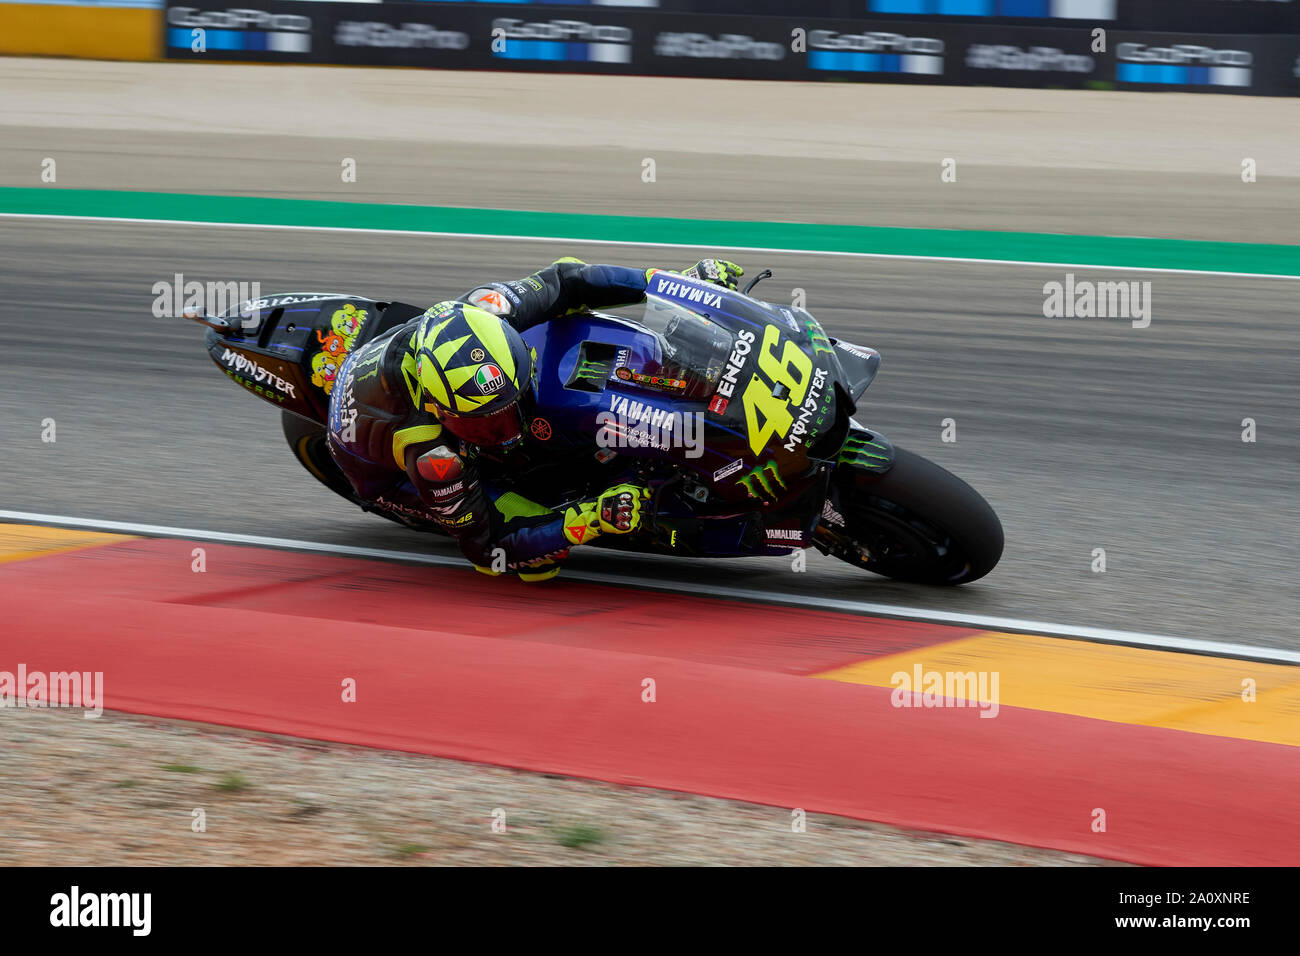 22nd September 2019; Ciudad del Motor de Aragon, Alcaniz, Spain; Aragon Motorcycle Grand Prix, Race Day; Valentino Rossi of the Monster Energy Yamaha Team rounds the bend Stock Photo